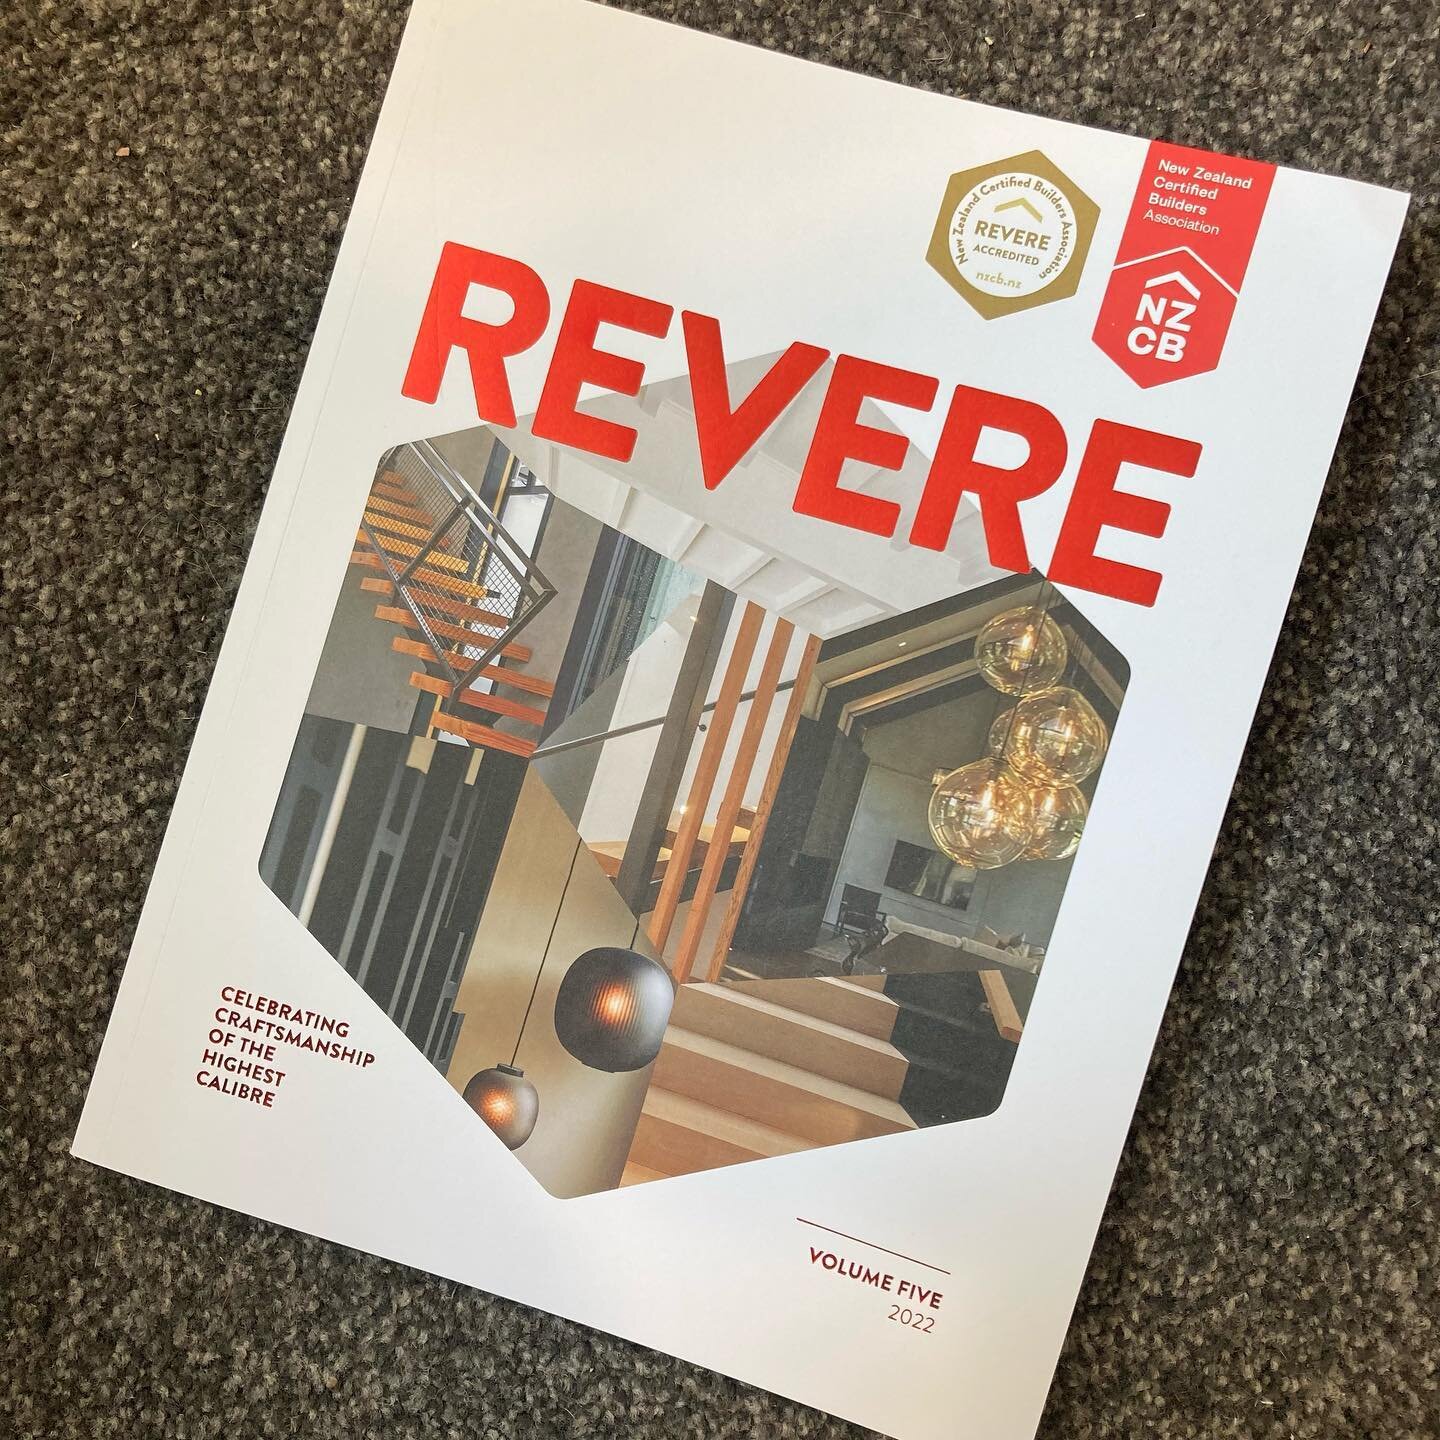 The new NZCB Revere magazine is out and we&rsquo;re beyond stocked to be included for this family home we built!

#kaiserconstructionbuilding #nzcb #reveremagazine #buildingyourfuture #buildersofinsta